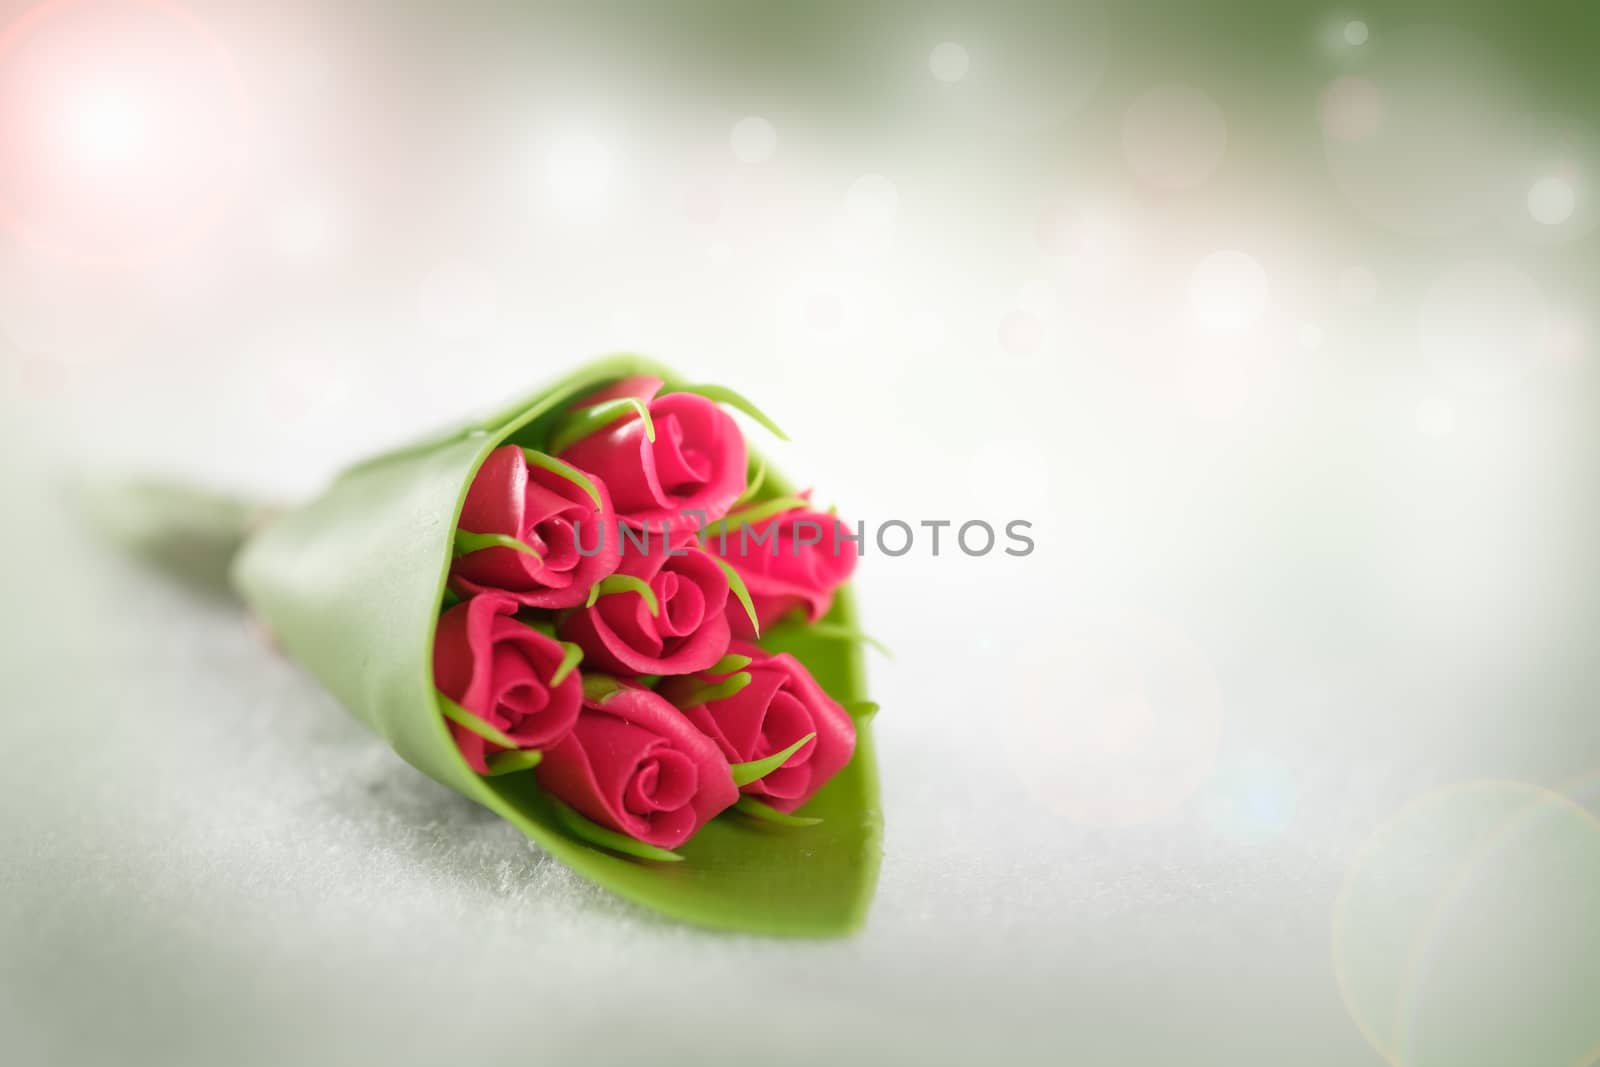 The red rose on abstract bokeh background in love concept for valentines day with romantic moment.